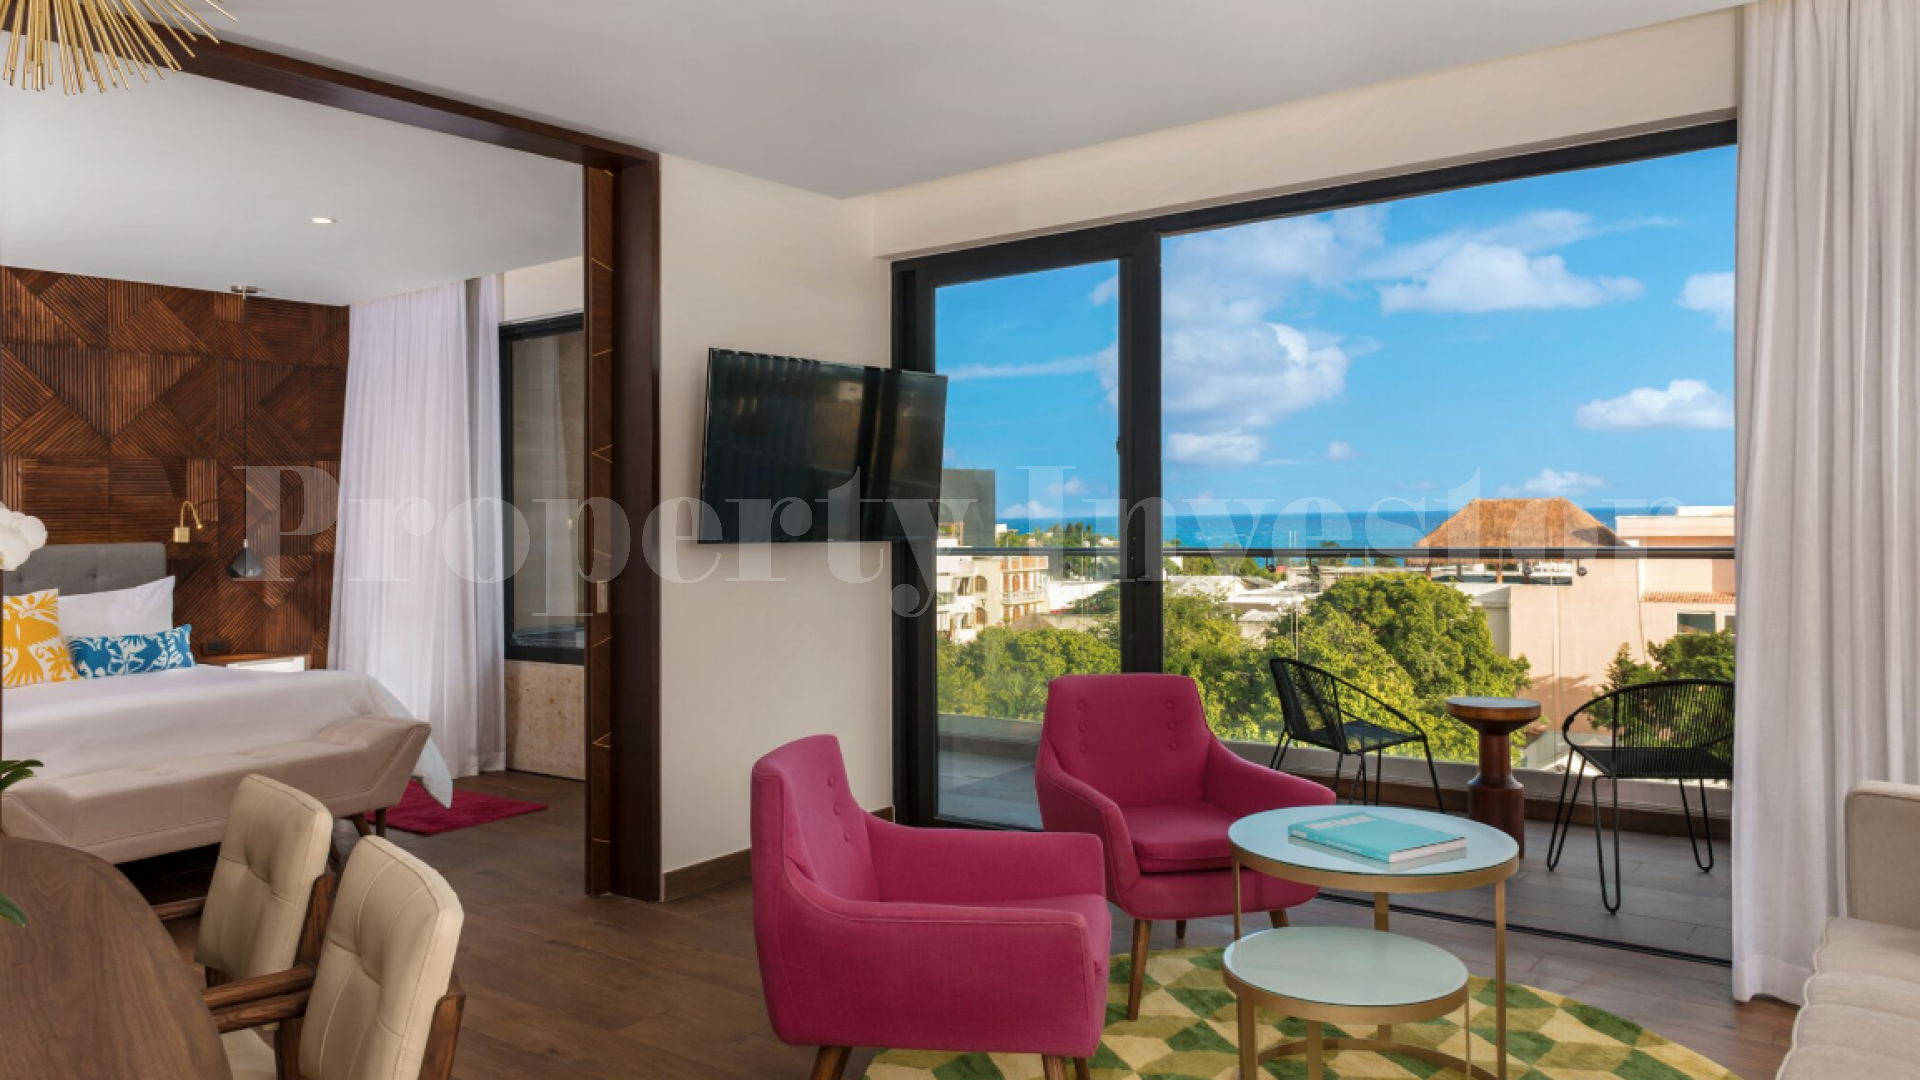 Exclusive 1 Bedroom Boutique Hotel Investment in Playa del Carmen (Unit 94)